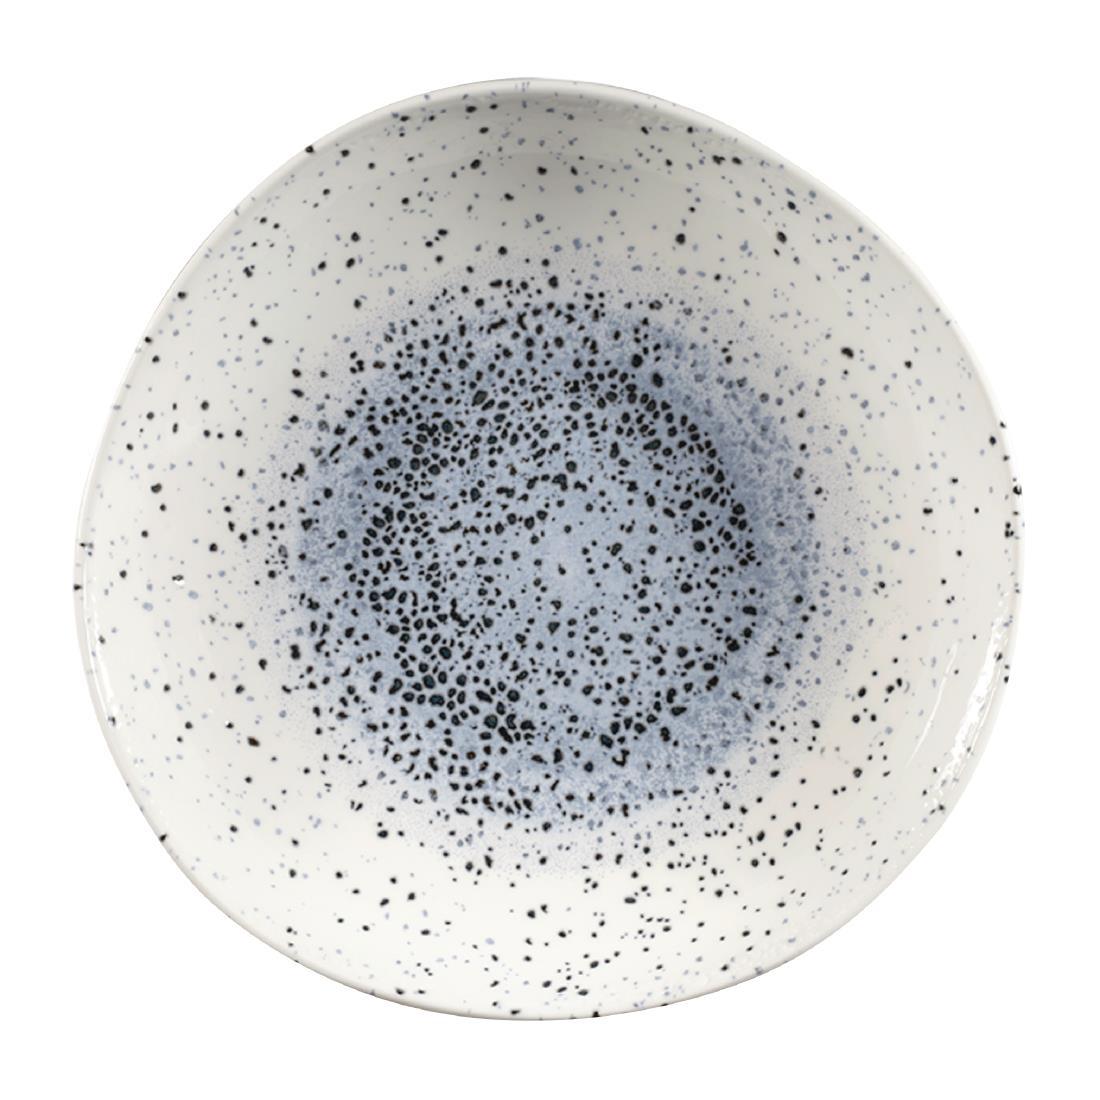 Churchill Studio Prints Mineral Blue Centre Organic Round Bowls 253mm 1.1Ltr (Pack of 12) - FC129  - 1